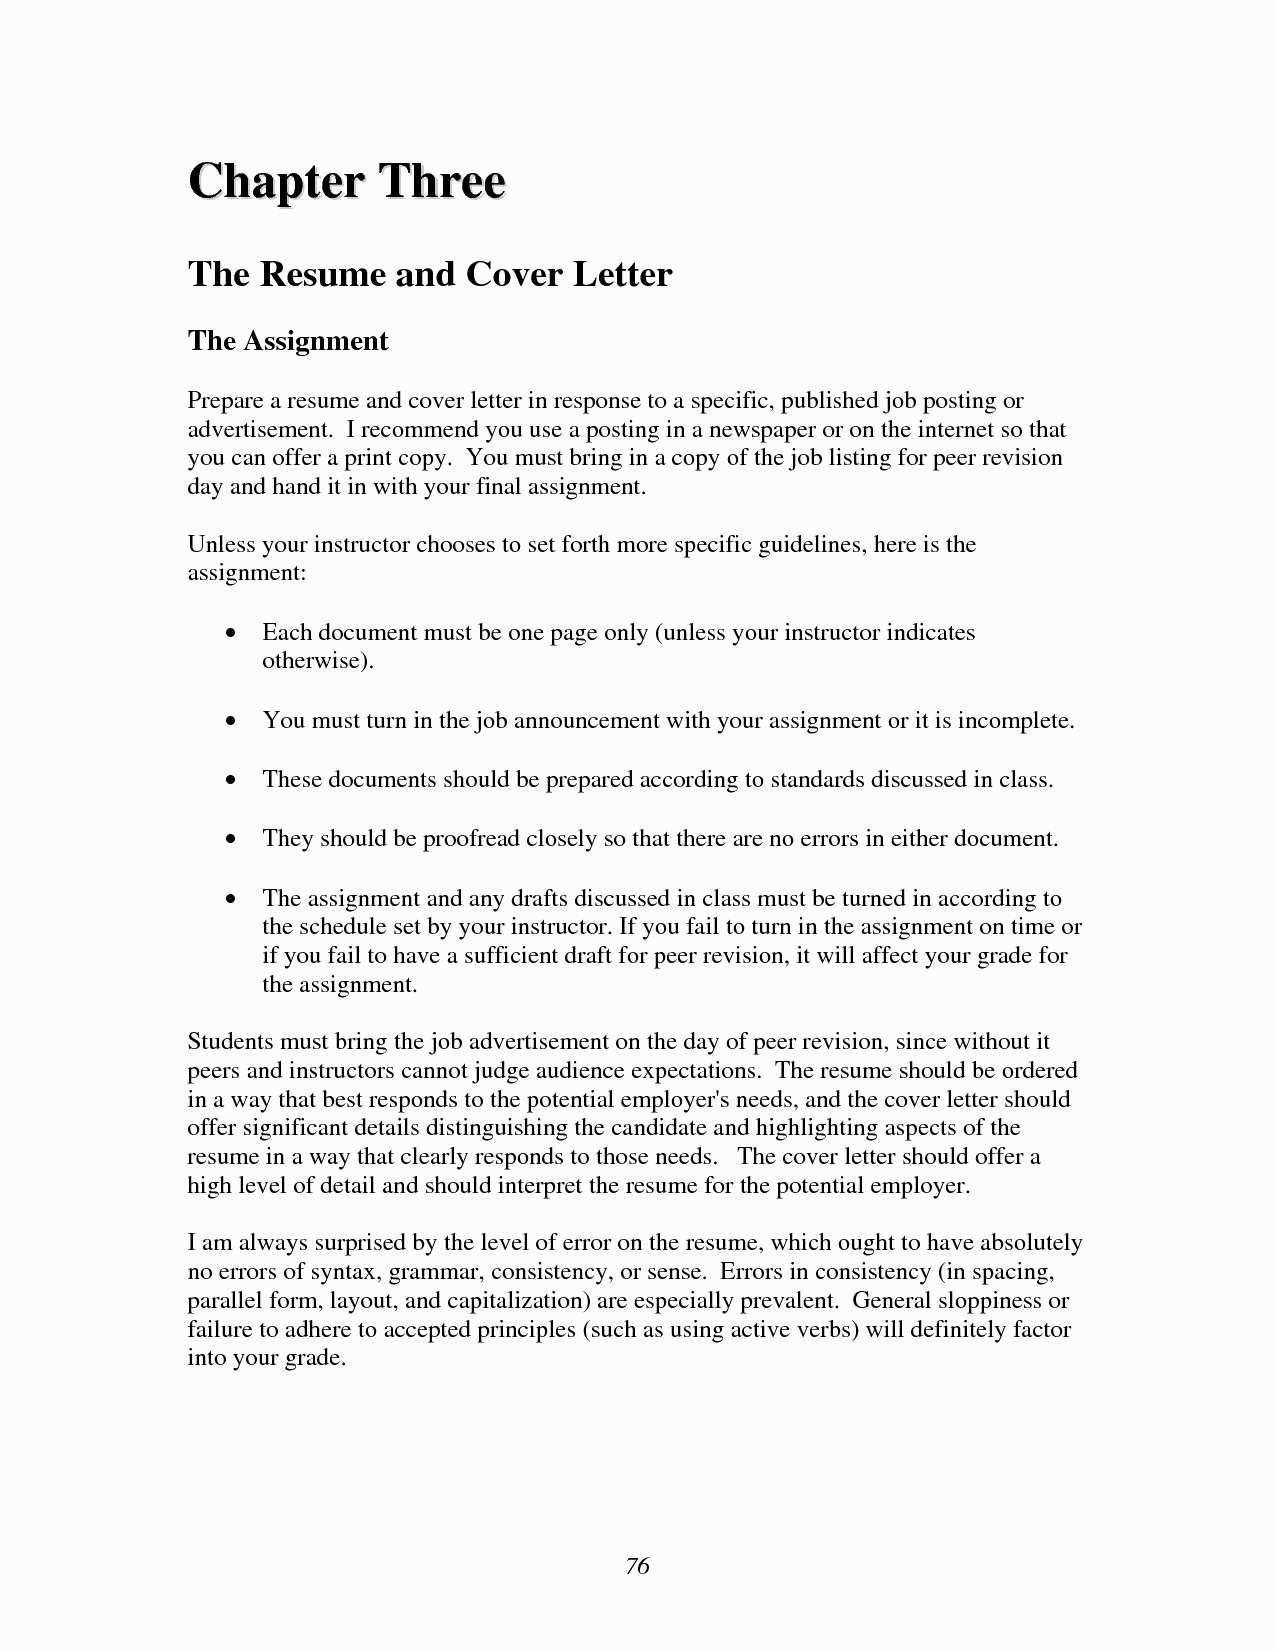 Job Cover Letter Template - Resume and Cover Letter Template Beautiful Fresh Job Fer Letter